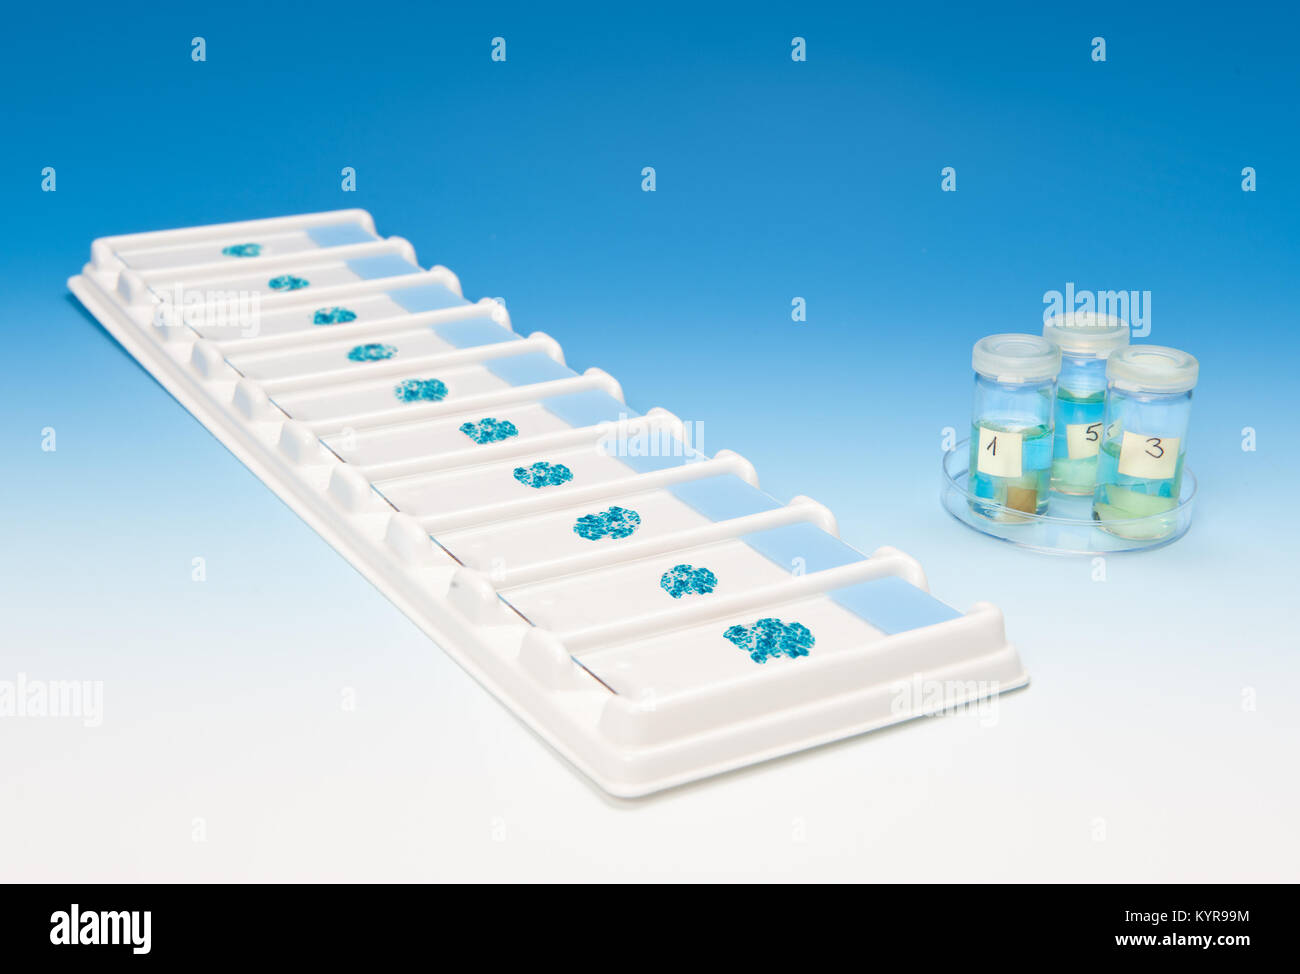 Patient tissue samples on a tray and in tubes on blue gradient background Stock Photo